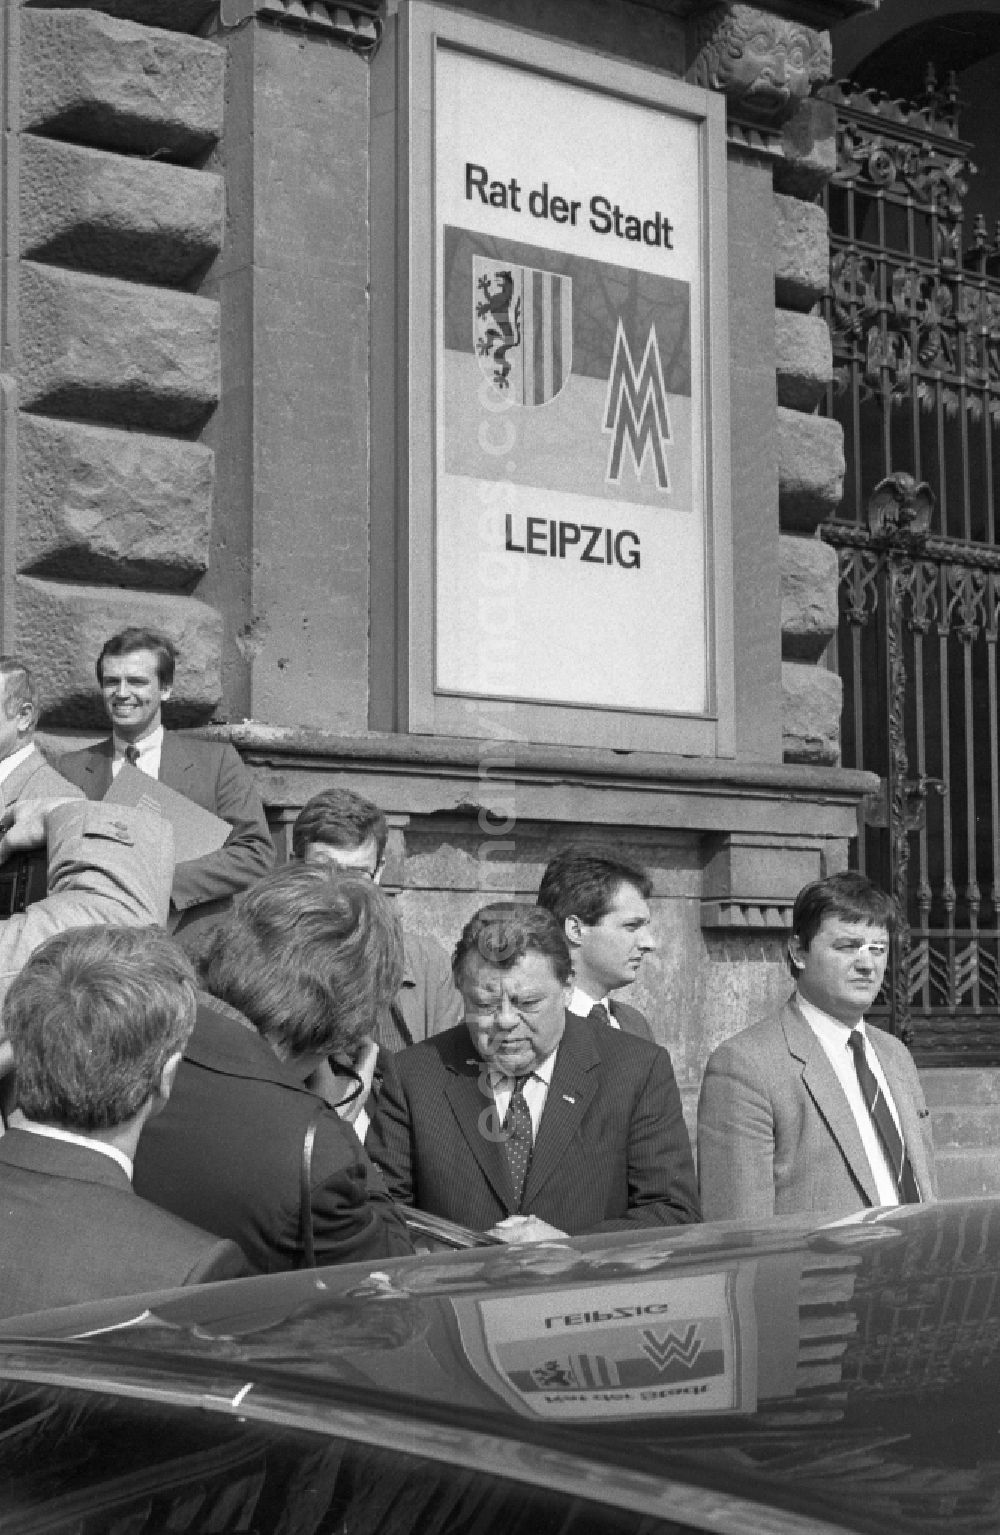 Leipzig: Reception for politicians CSU chairman Franz Josef Strauss in front of the town hall in the district of Mitte in Leipzig in the state of Saxony in the area of the former GDR, German Democratic Republic